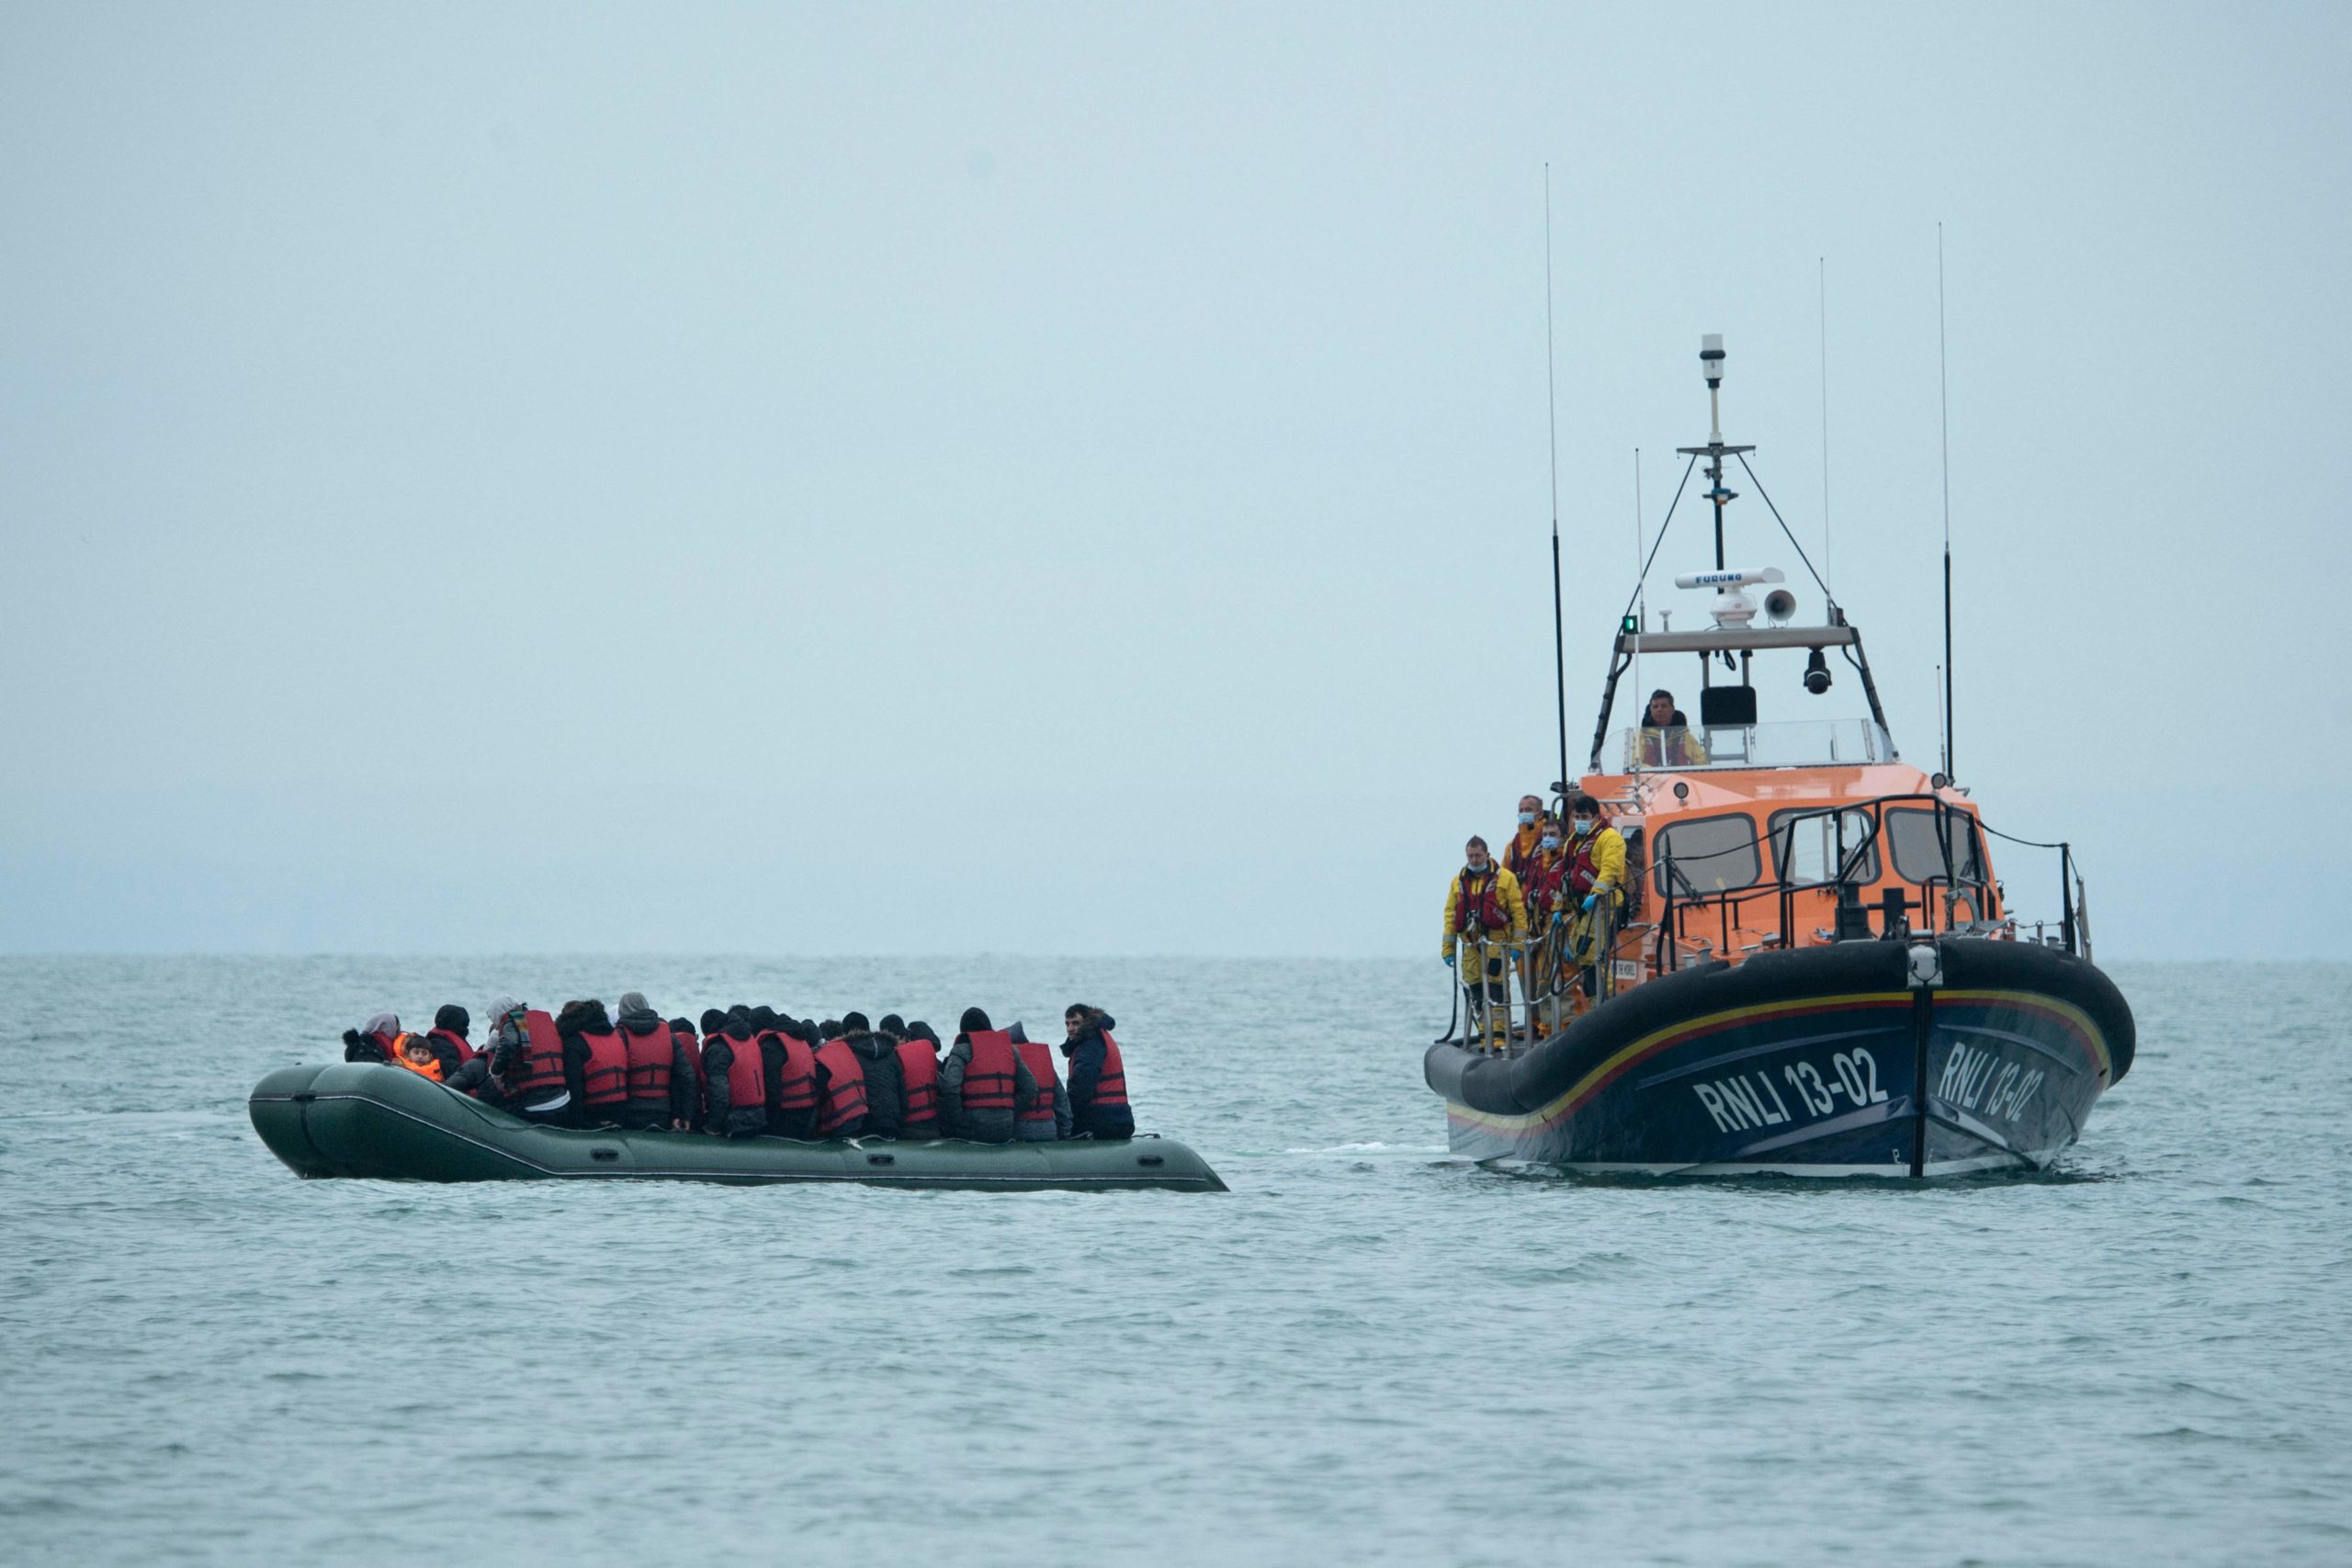 English channel: Timeline of tragic deaths that have occurred on the perilous sea crossing